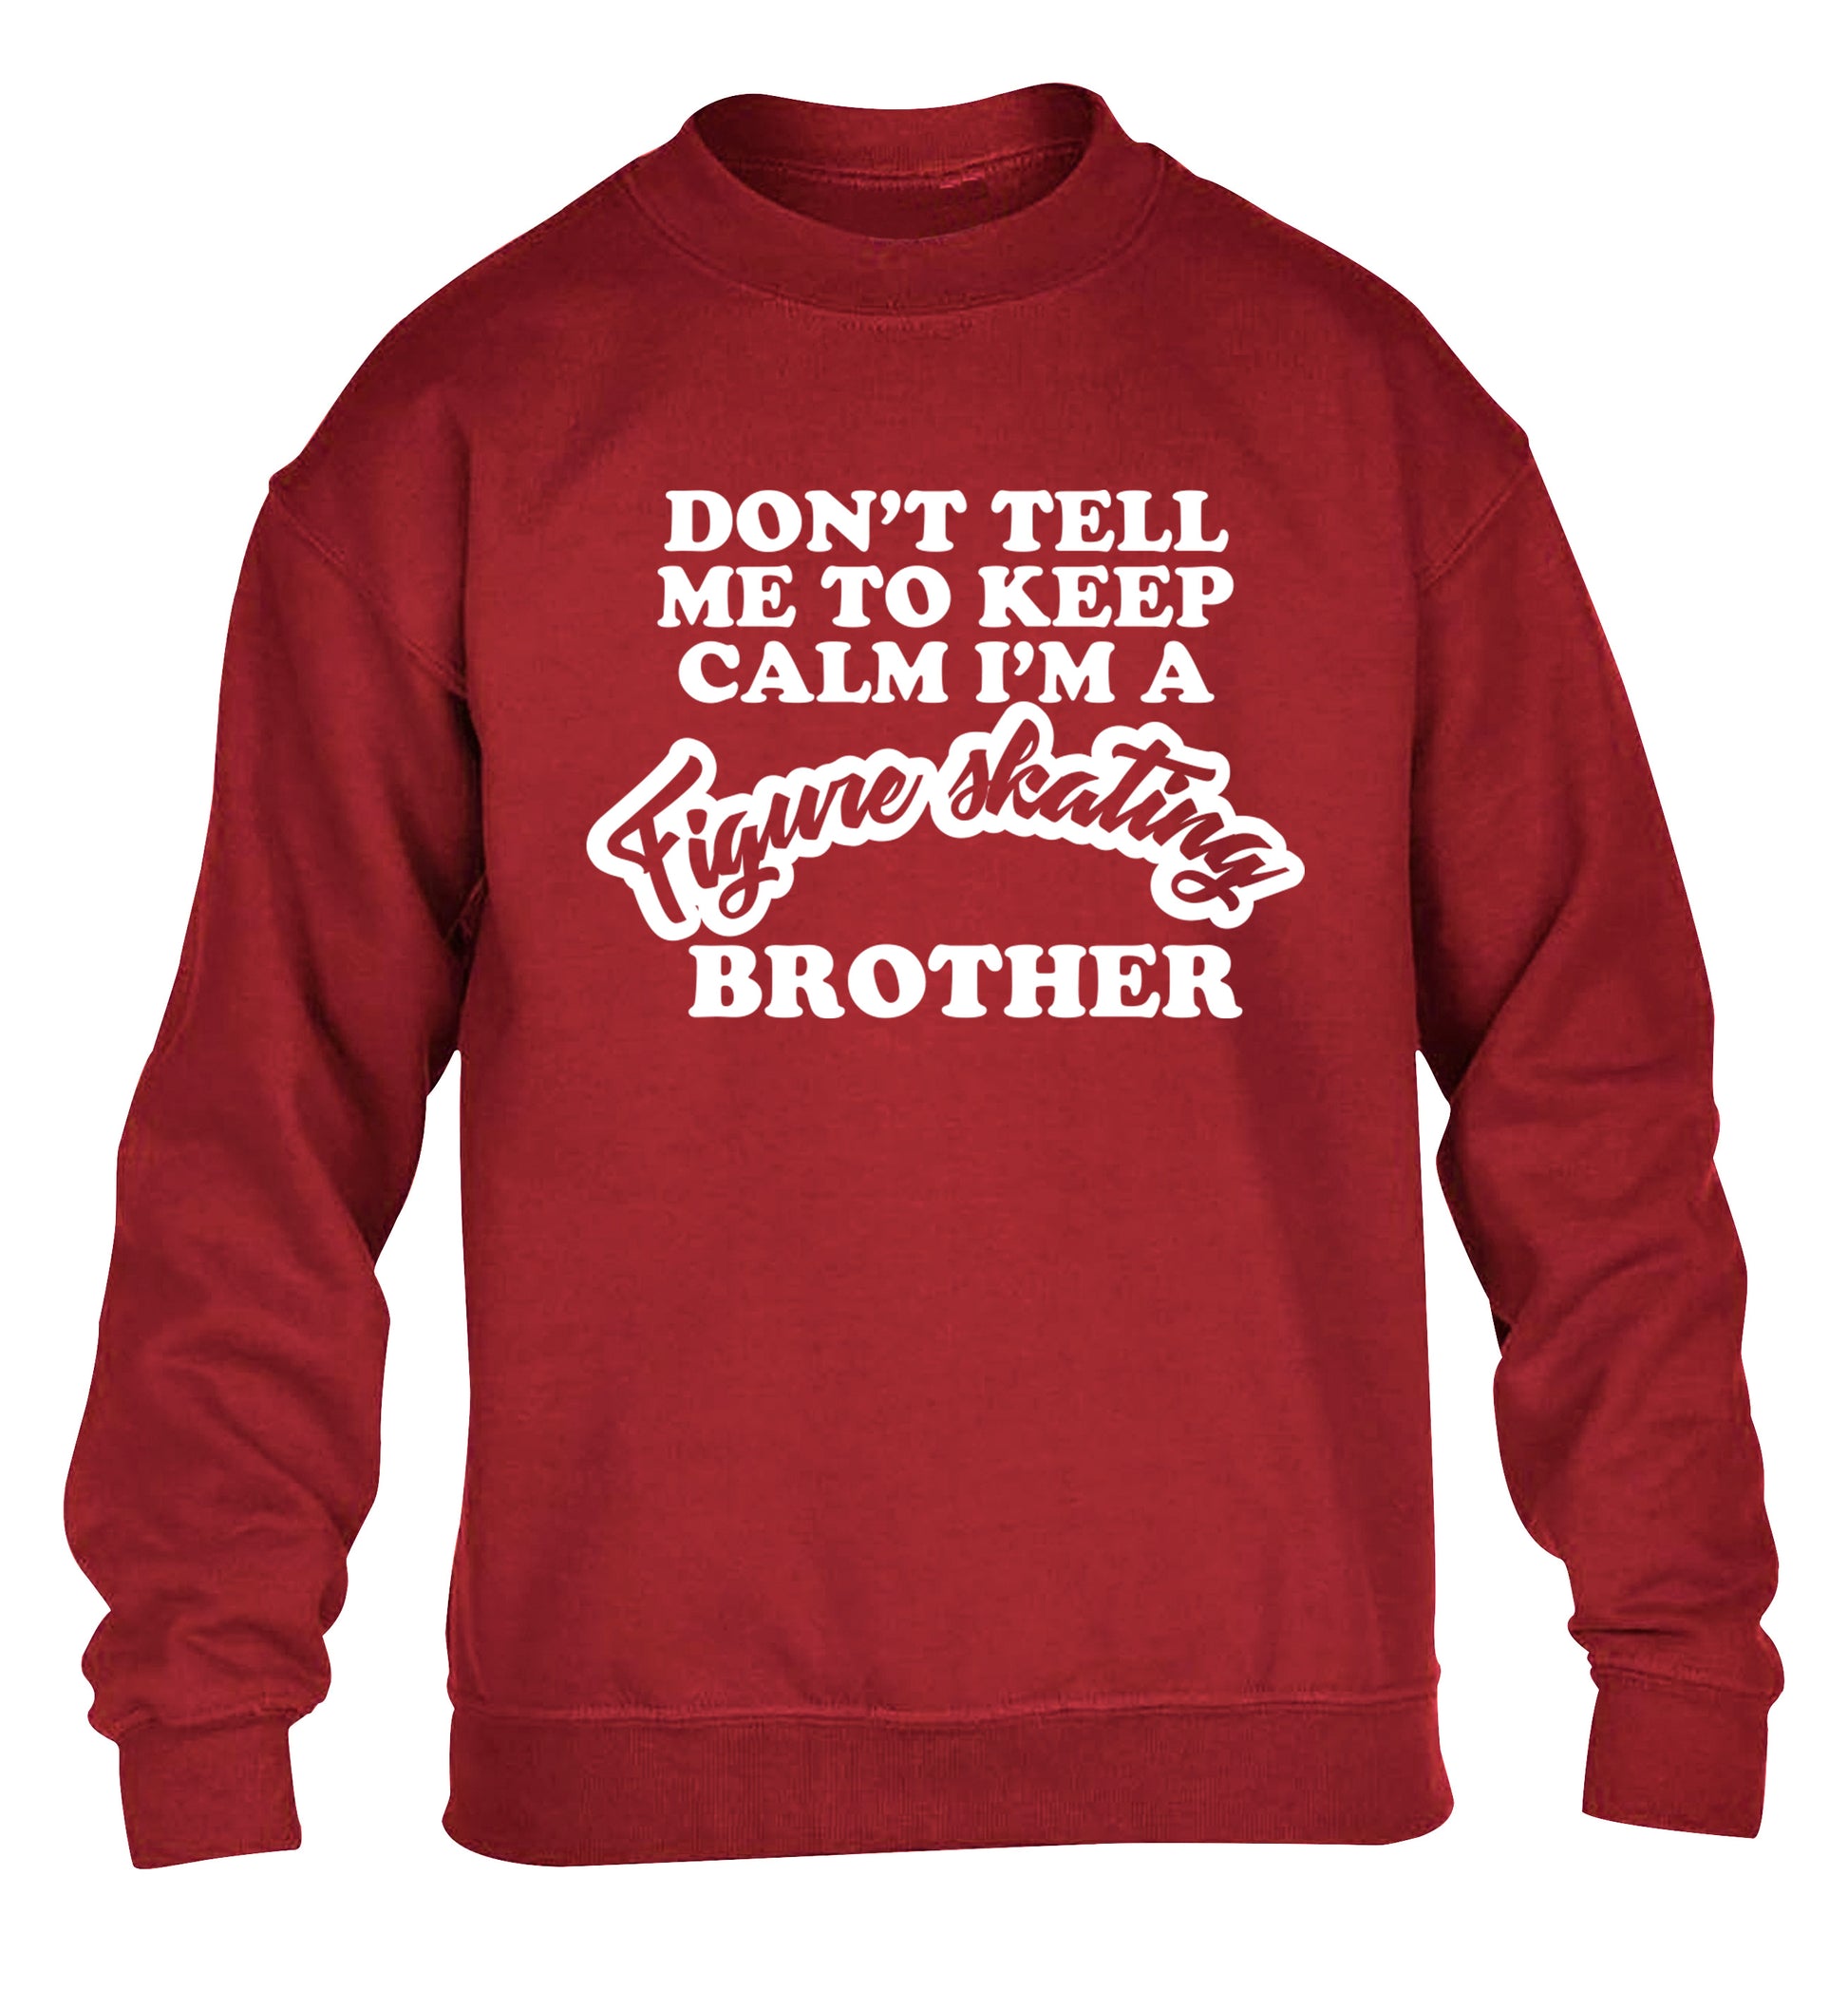 Don't tell me to keep calm I'm a figure skating brother children's grey sweater 12-14 Years